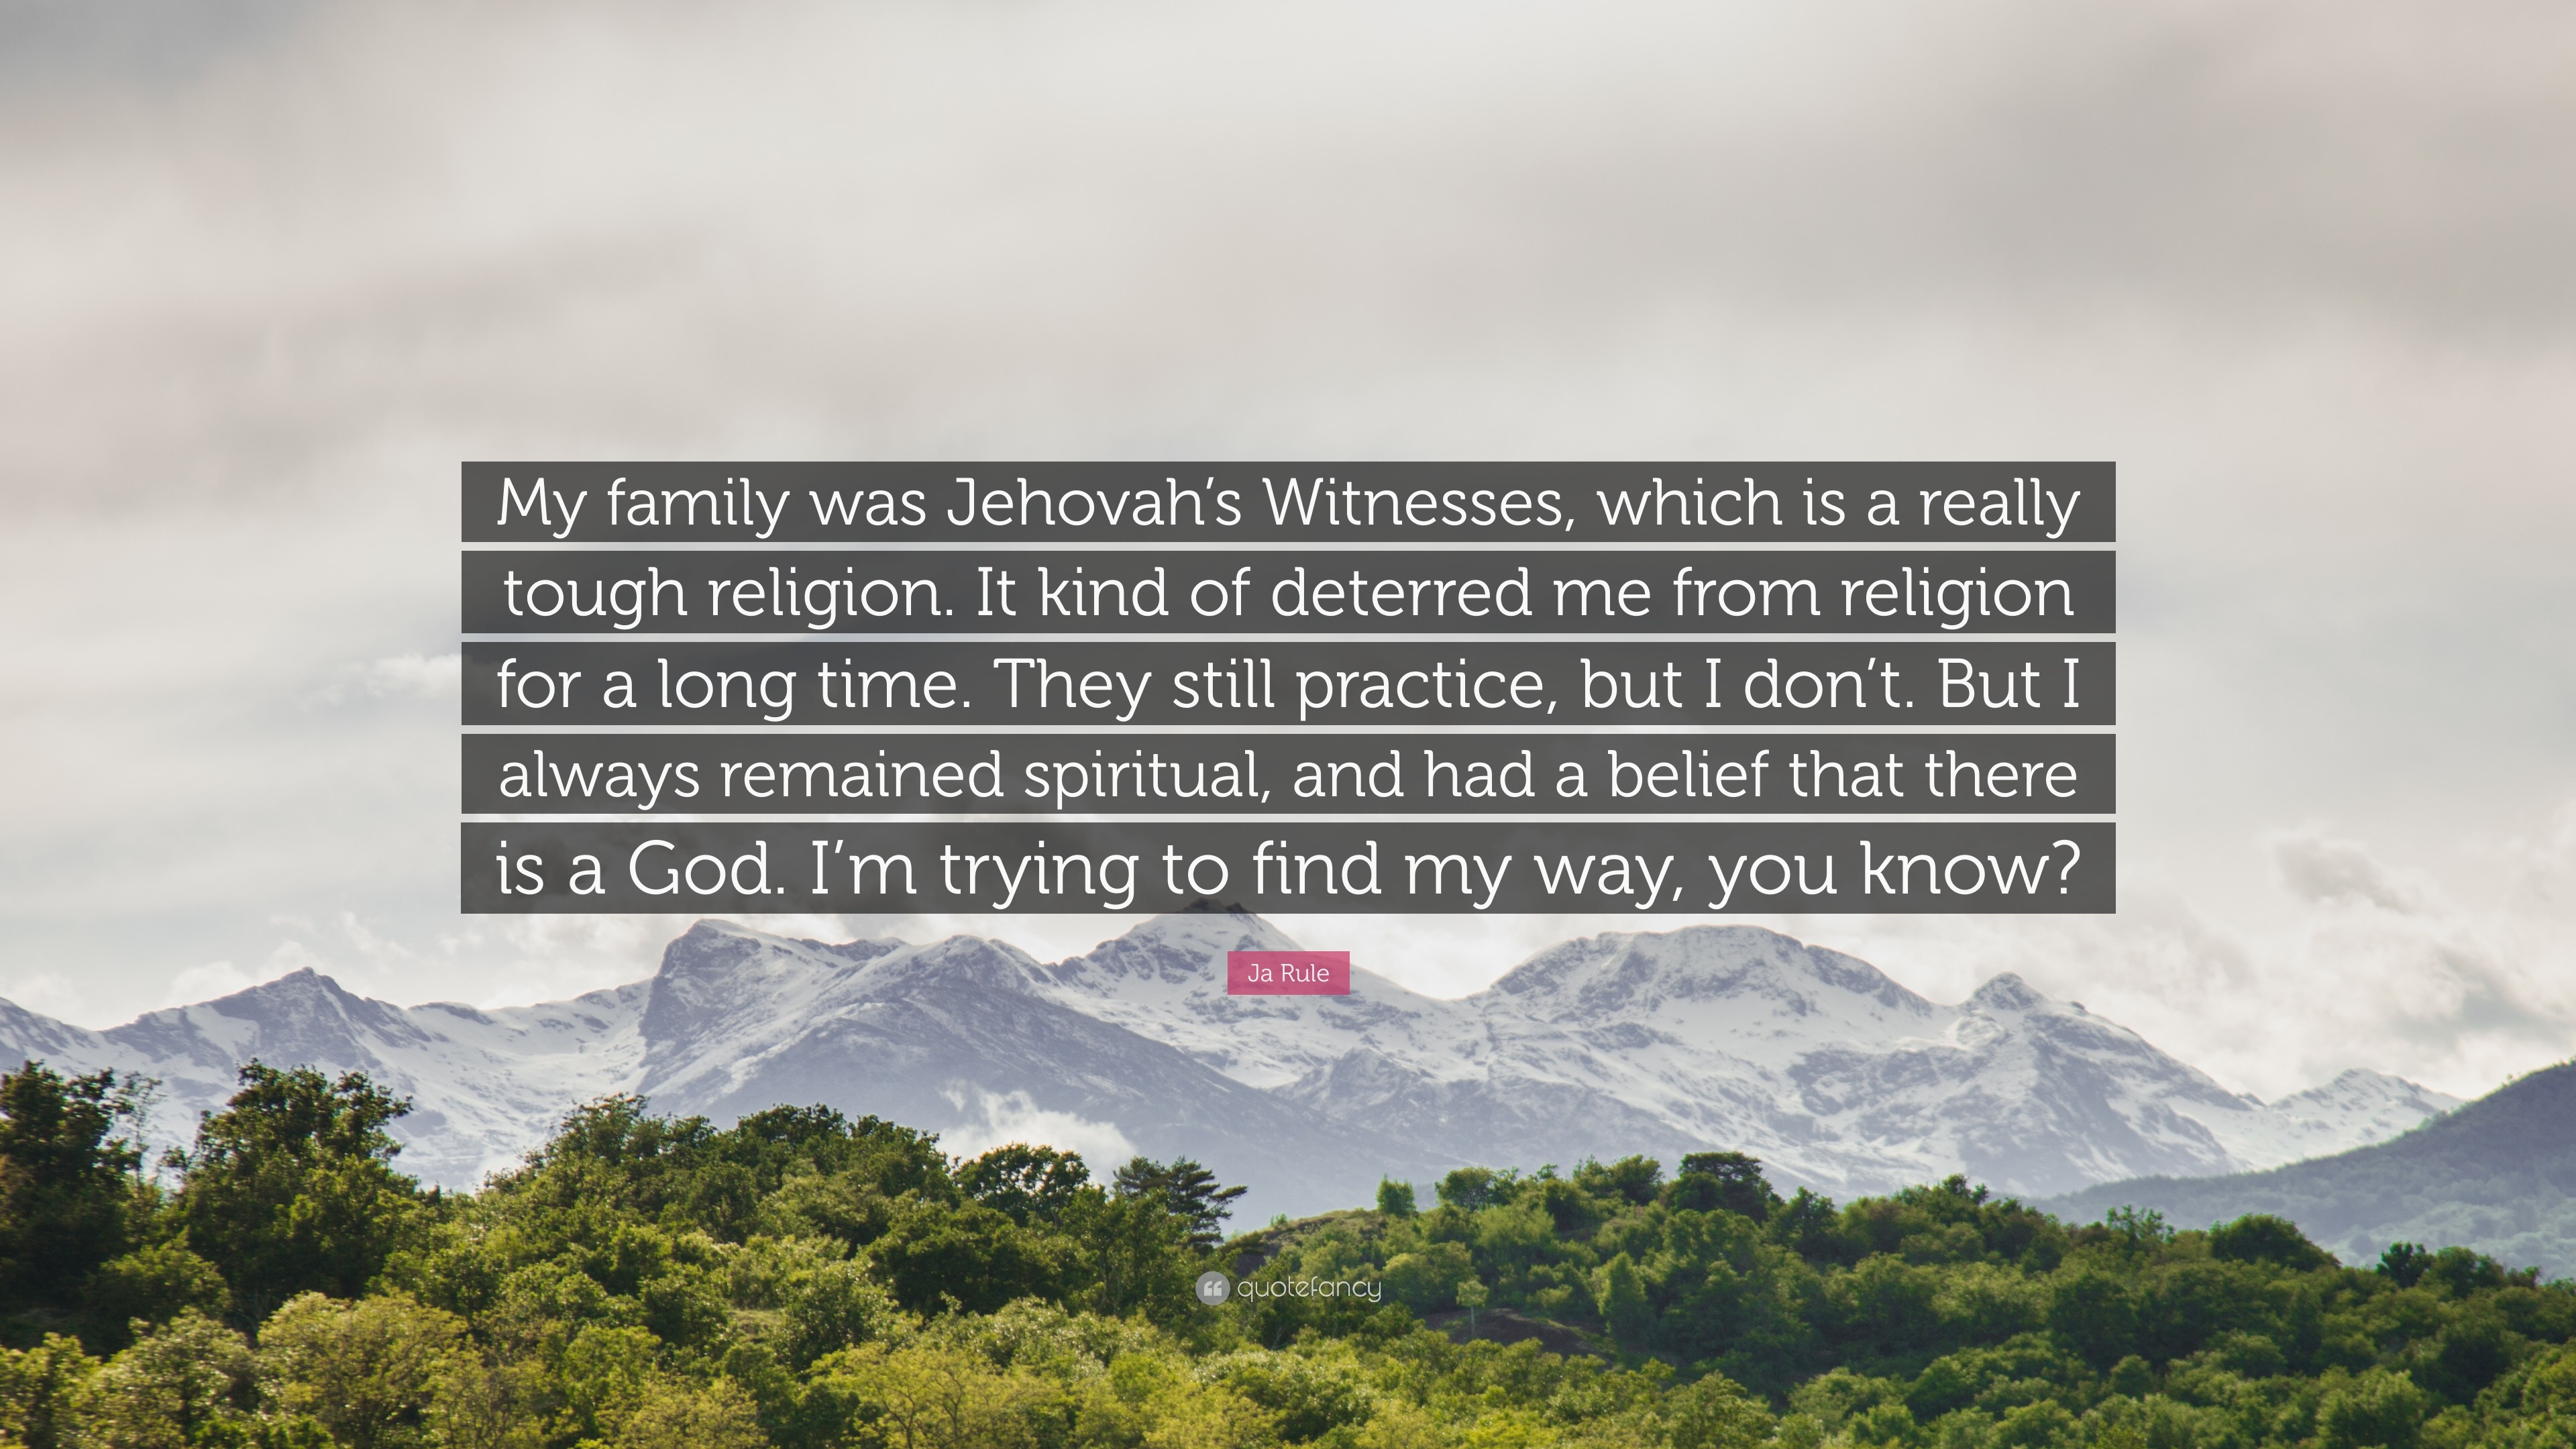 3840x2160 Ja Rule Quote: “My family was Jehovah's Witnesses, which is a really tough